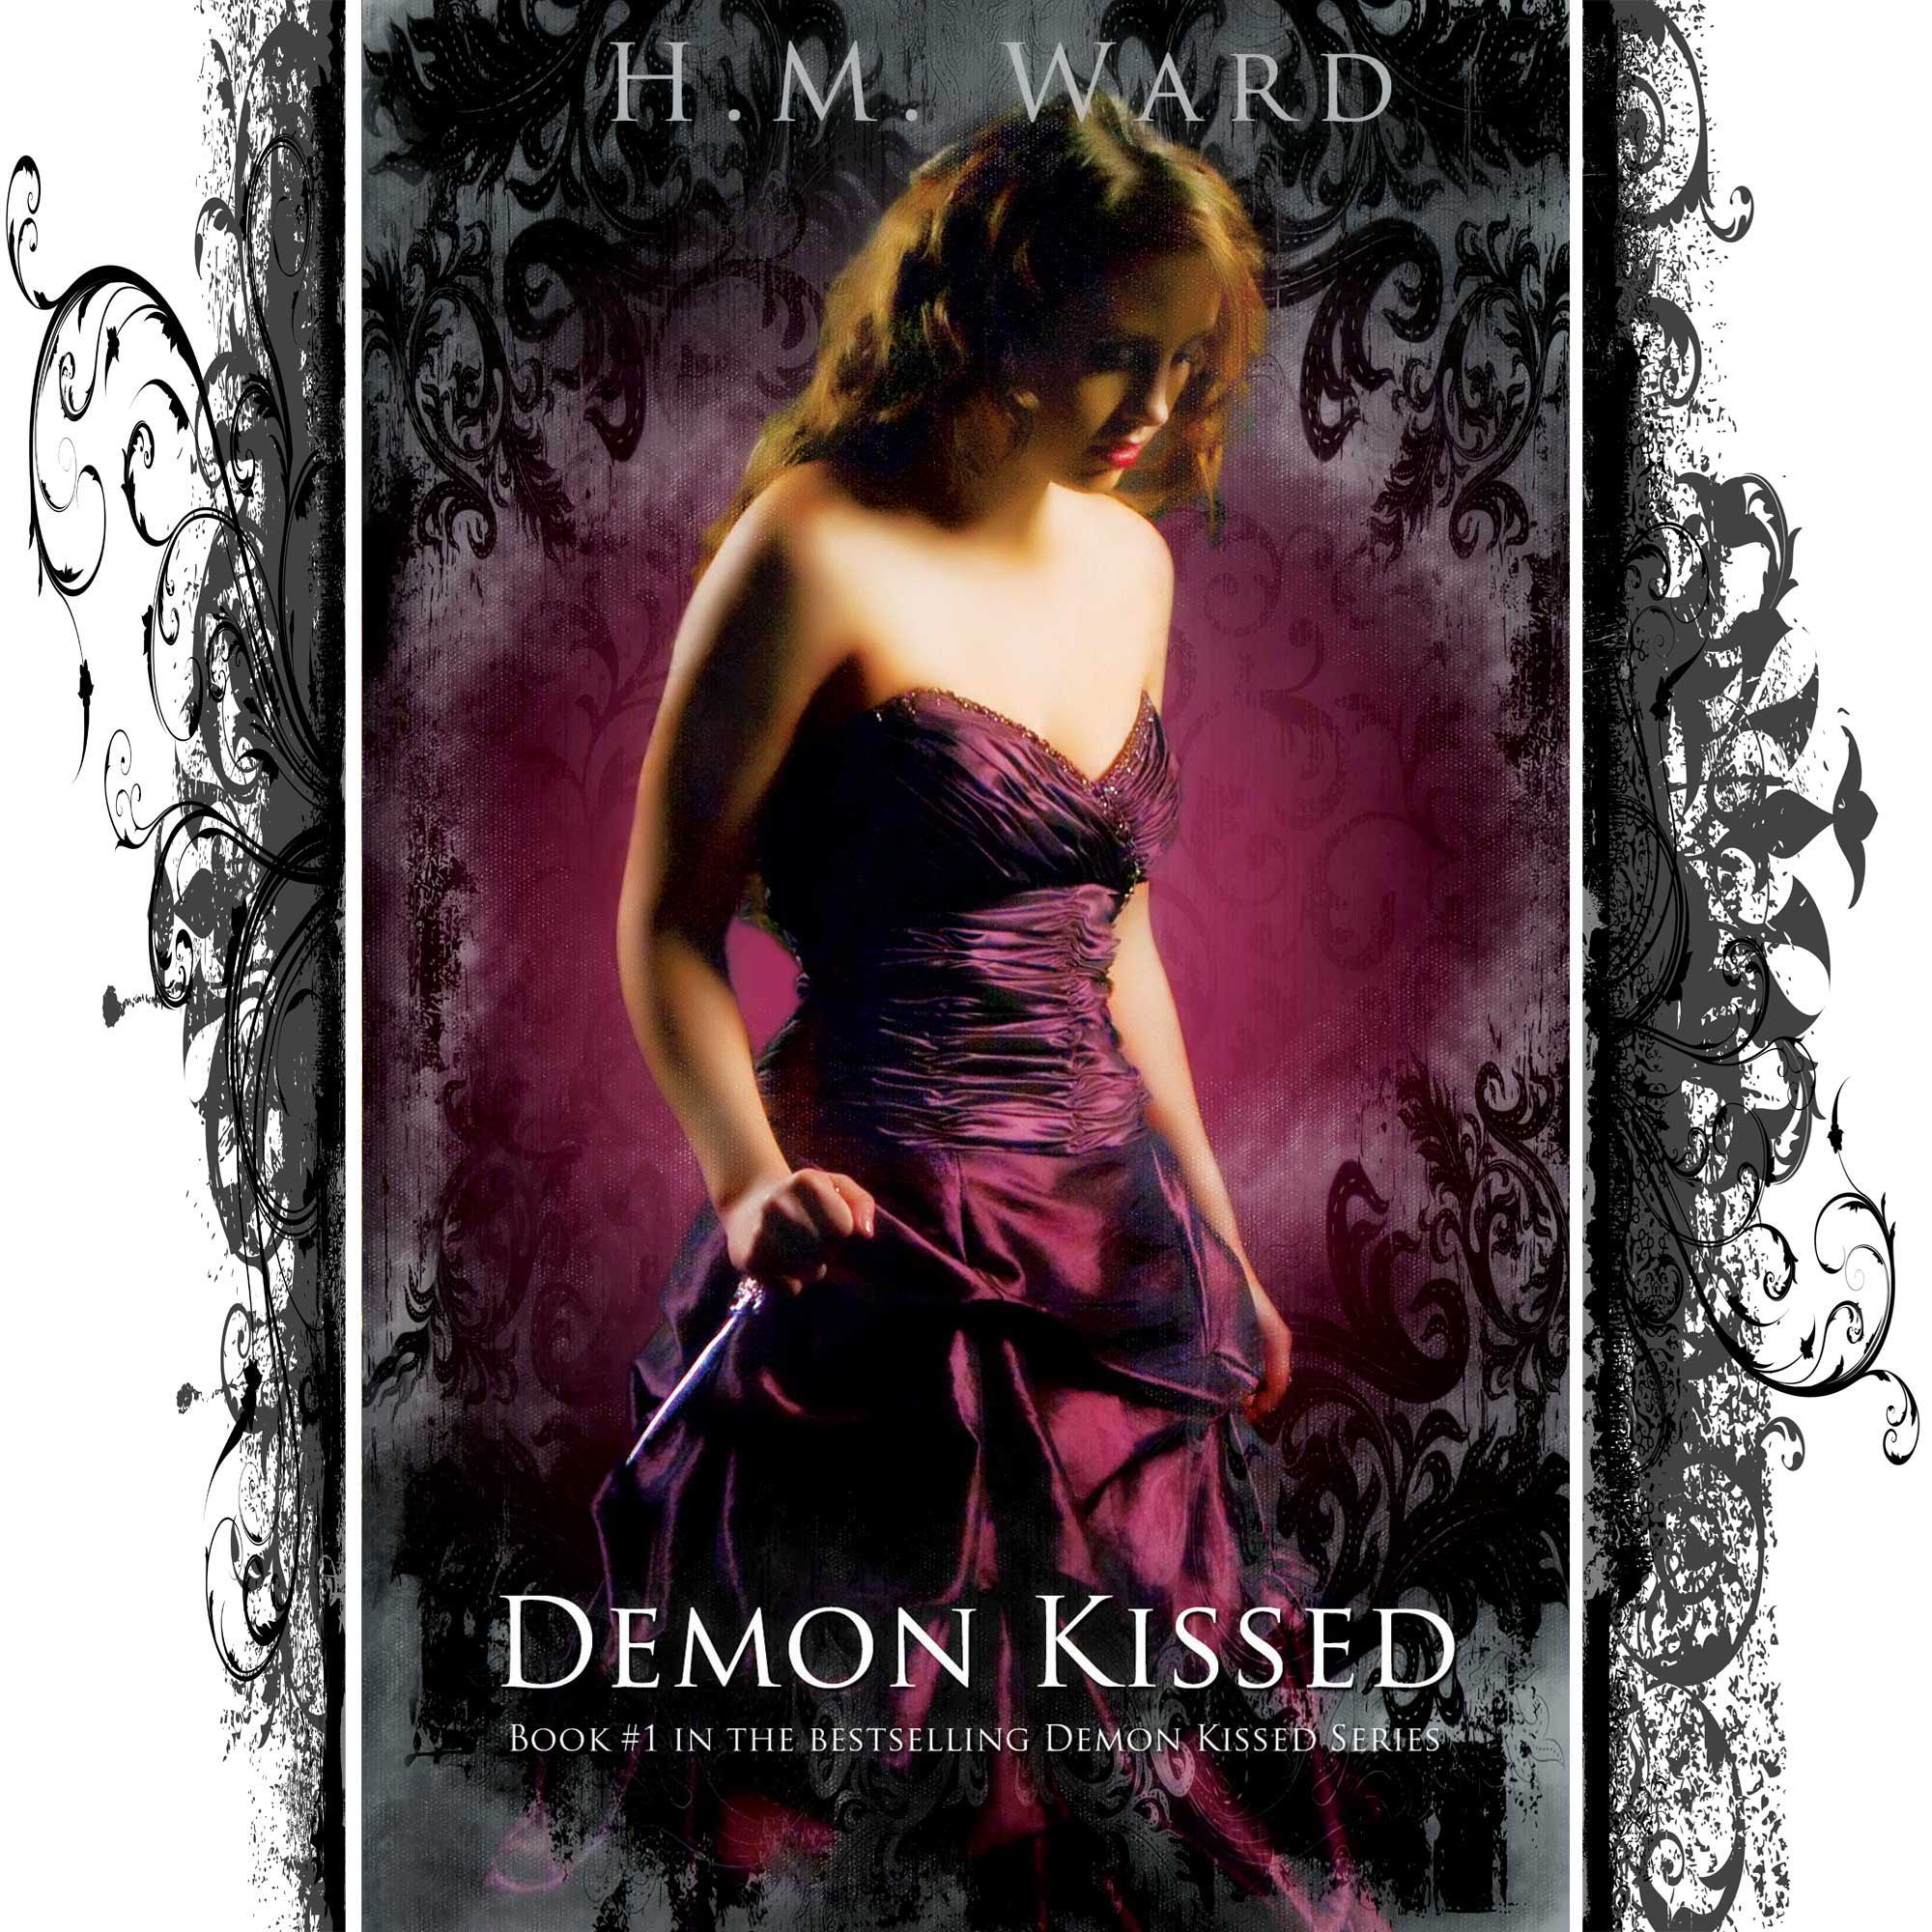 New Demon Kissed Series Book Covers Ya Paranormal Romance H M Ward New York Times